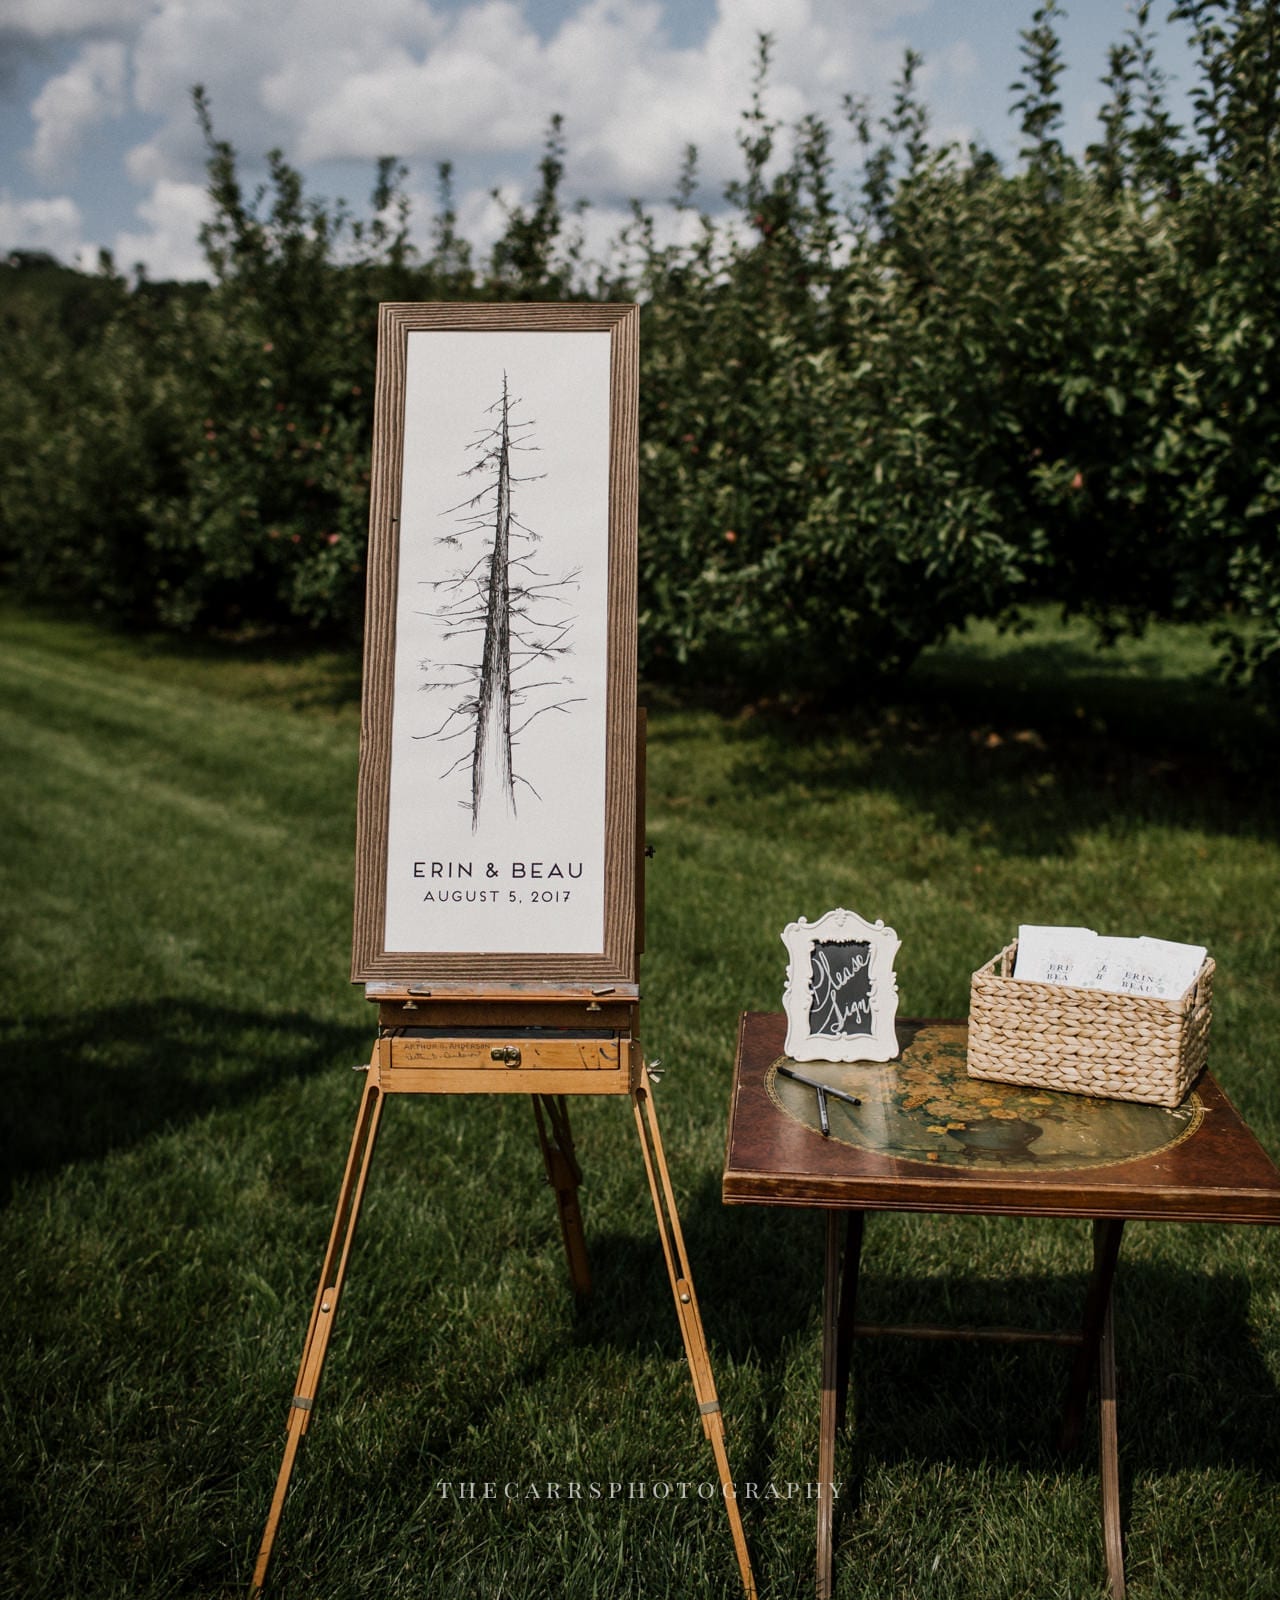 ceremony programs and guest book at Eckers Apple Farm Wedding - Destination Photographer